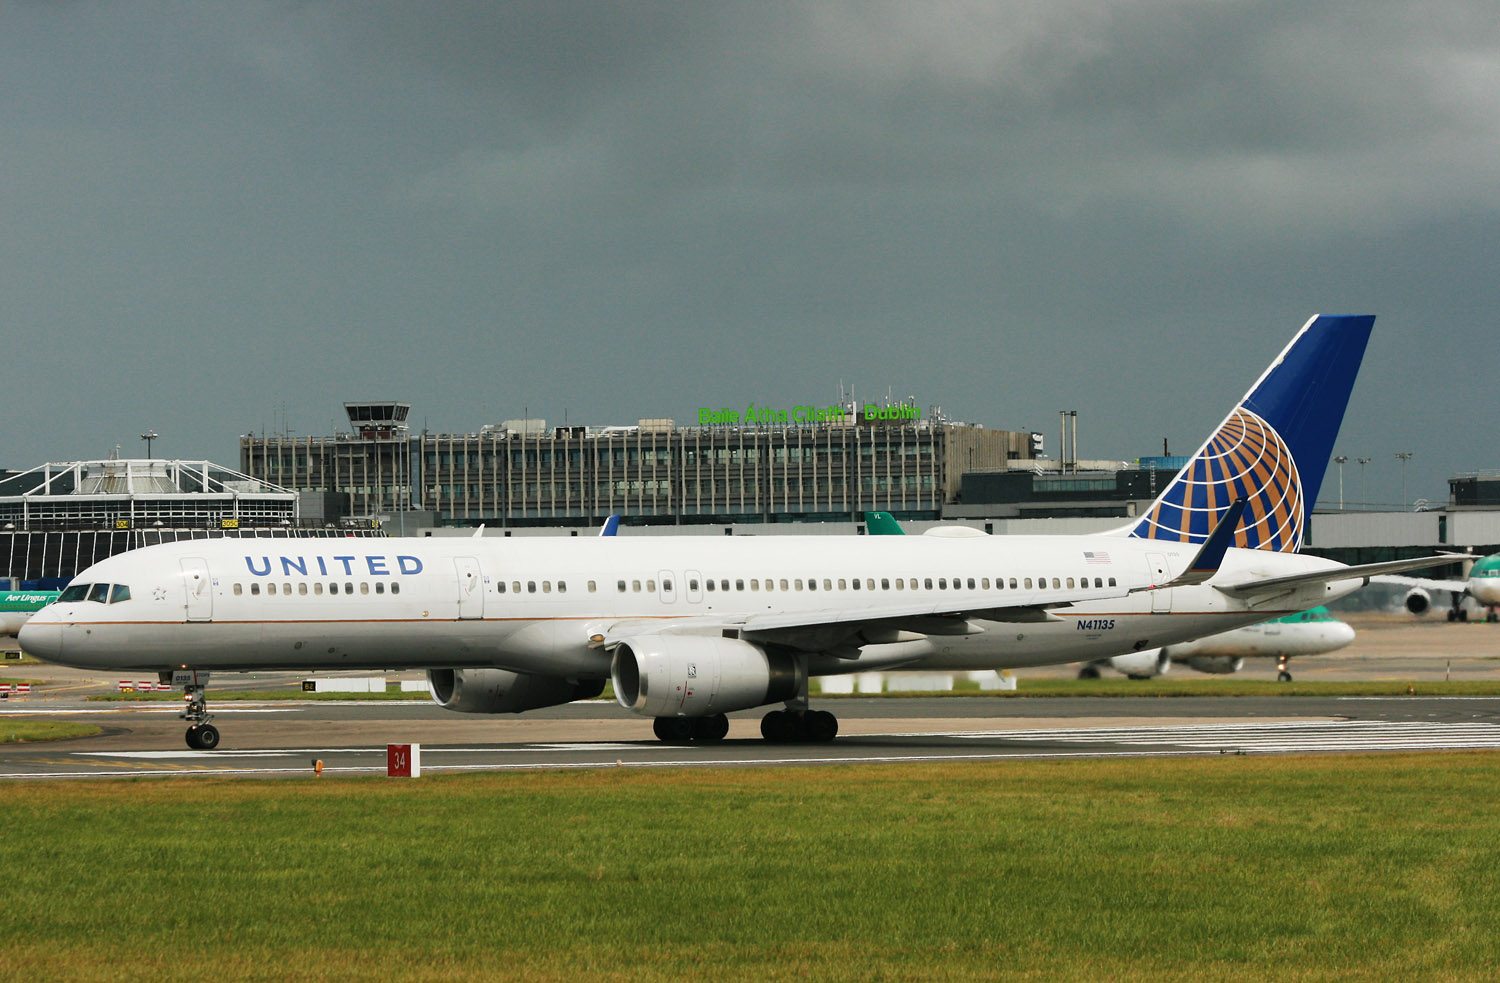 united-airlines-boeing-757-img4863-jl